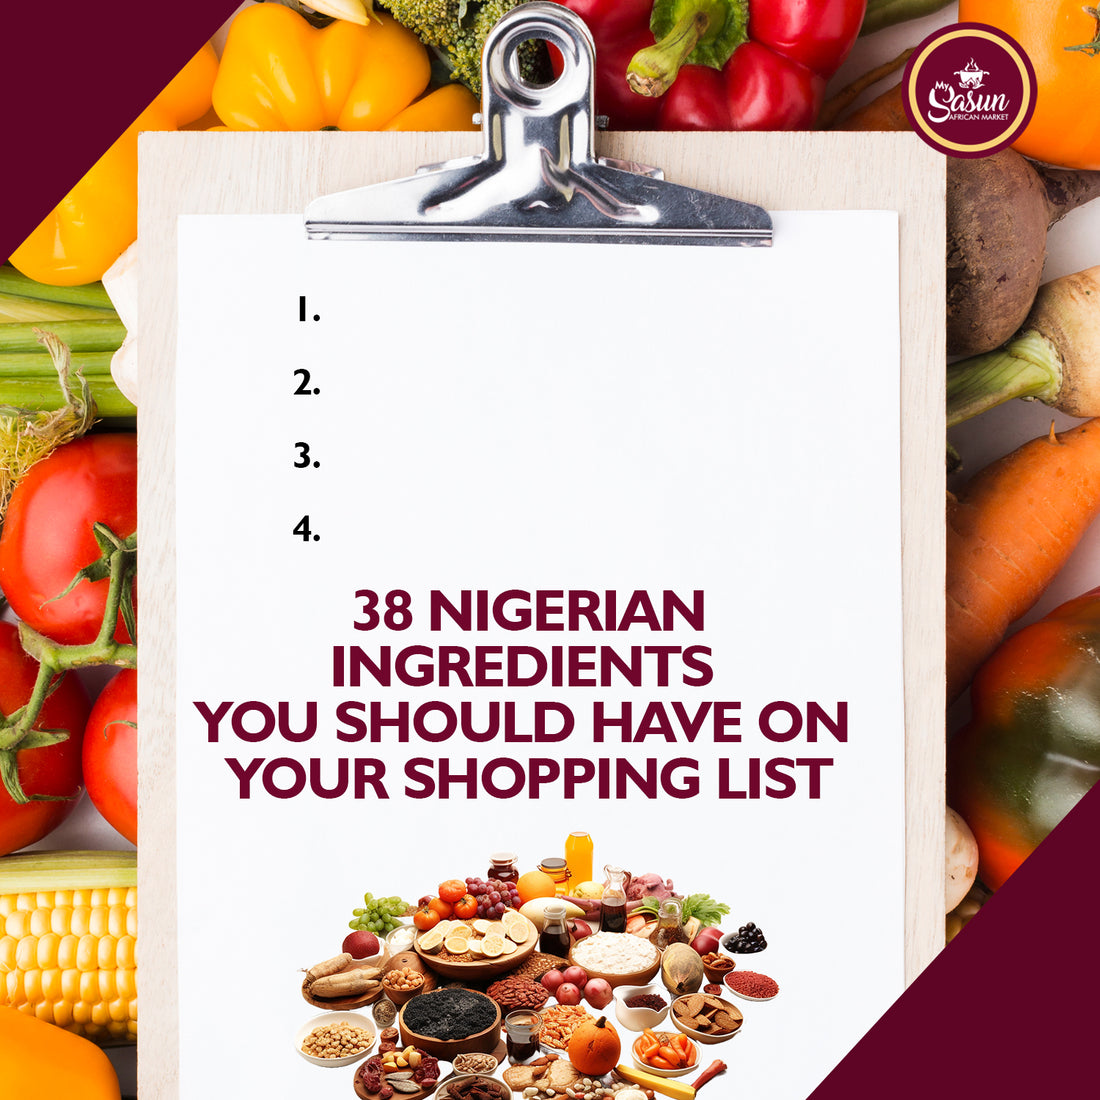 38 Nigerian Ingredients You Should Have on your Shopping List